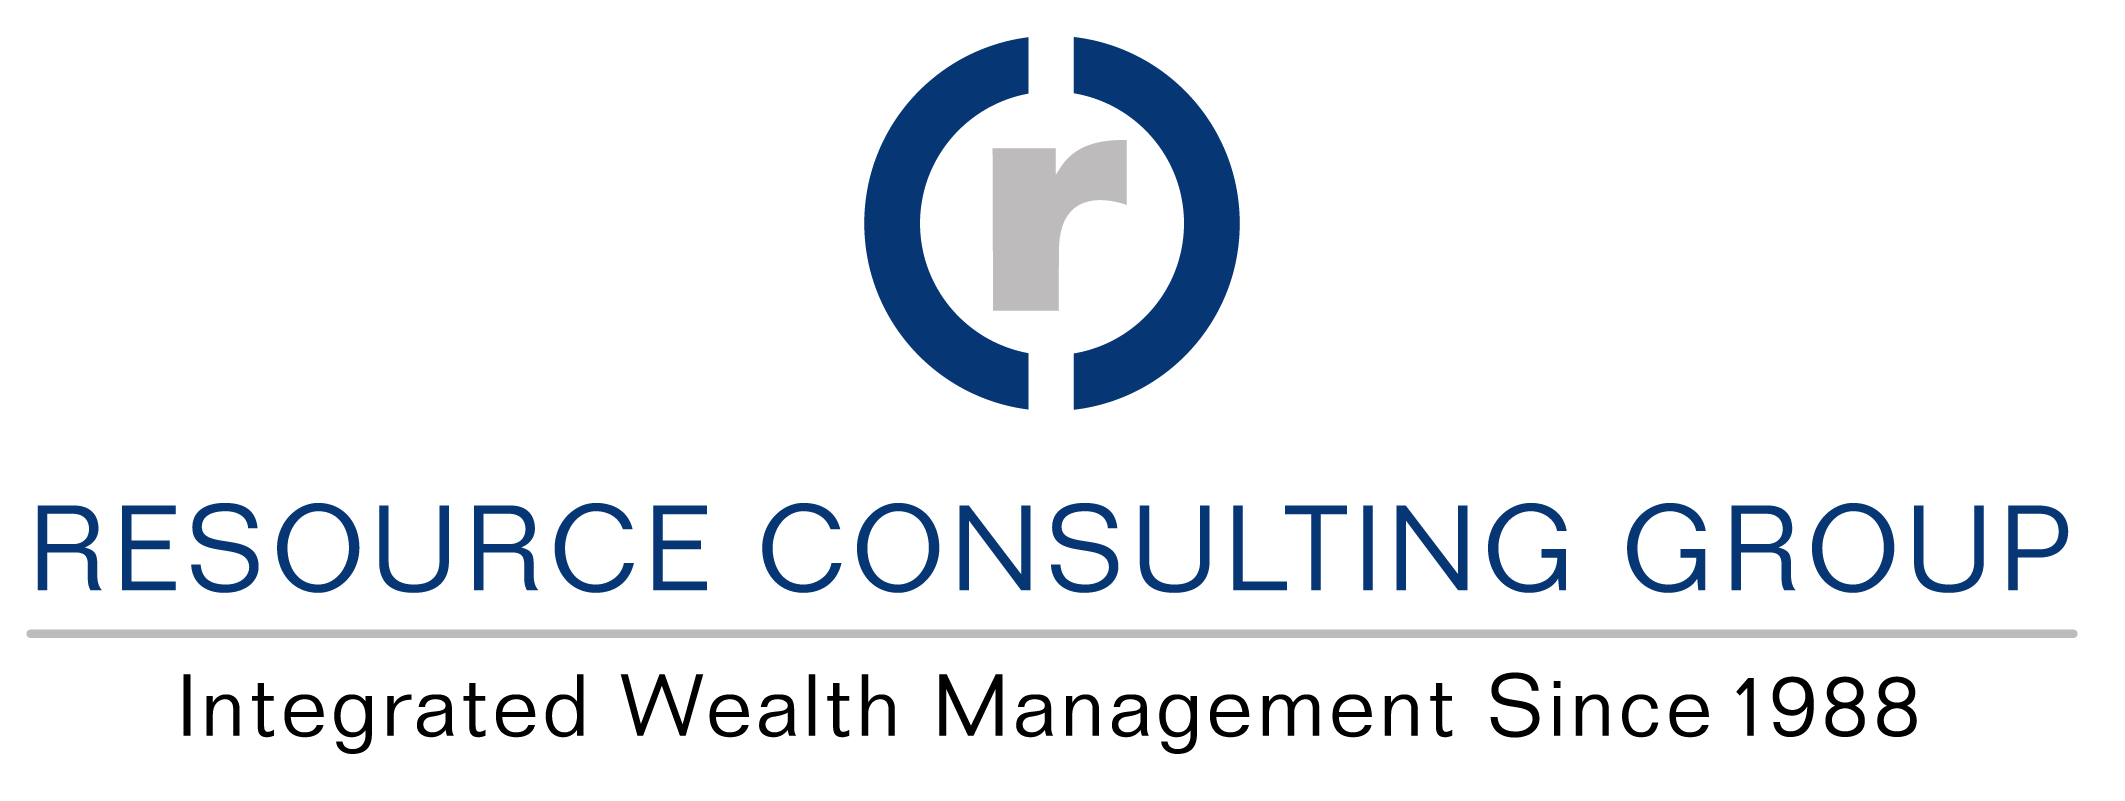 Resource Consulting Group Company Logo